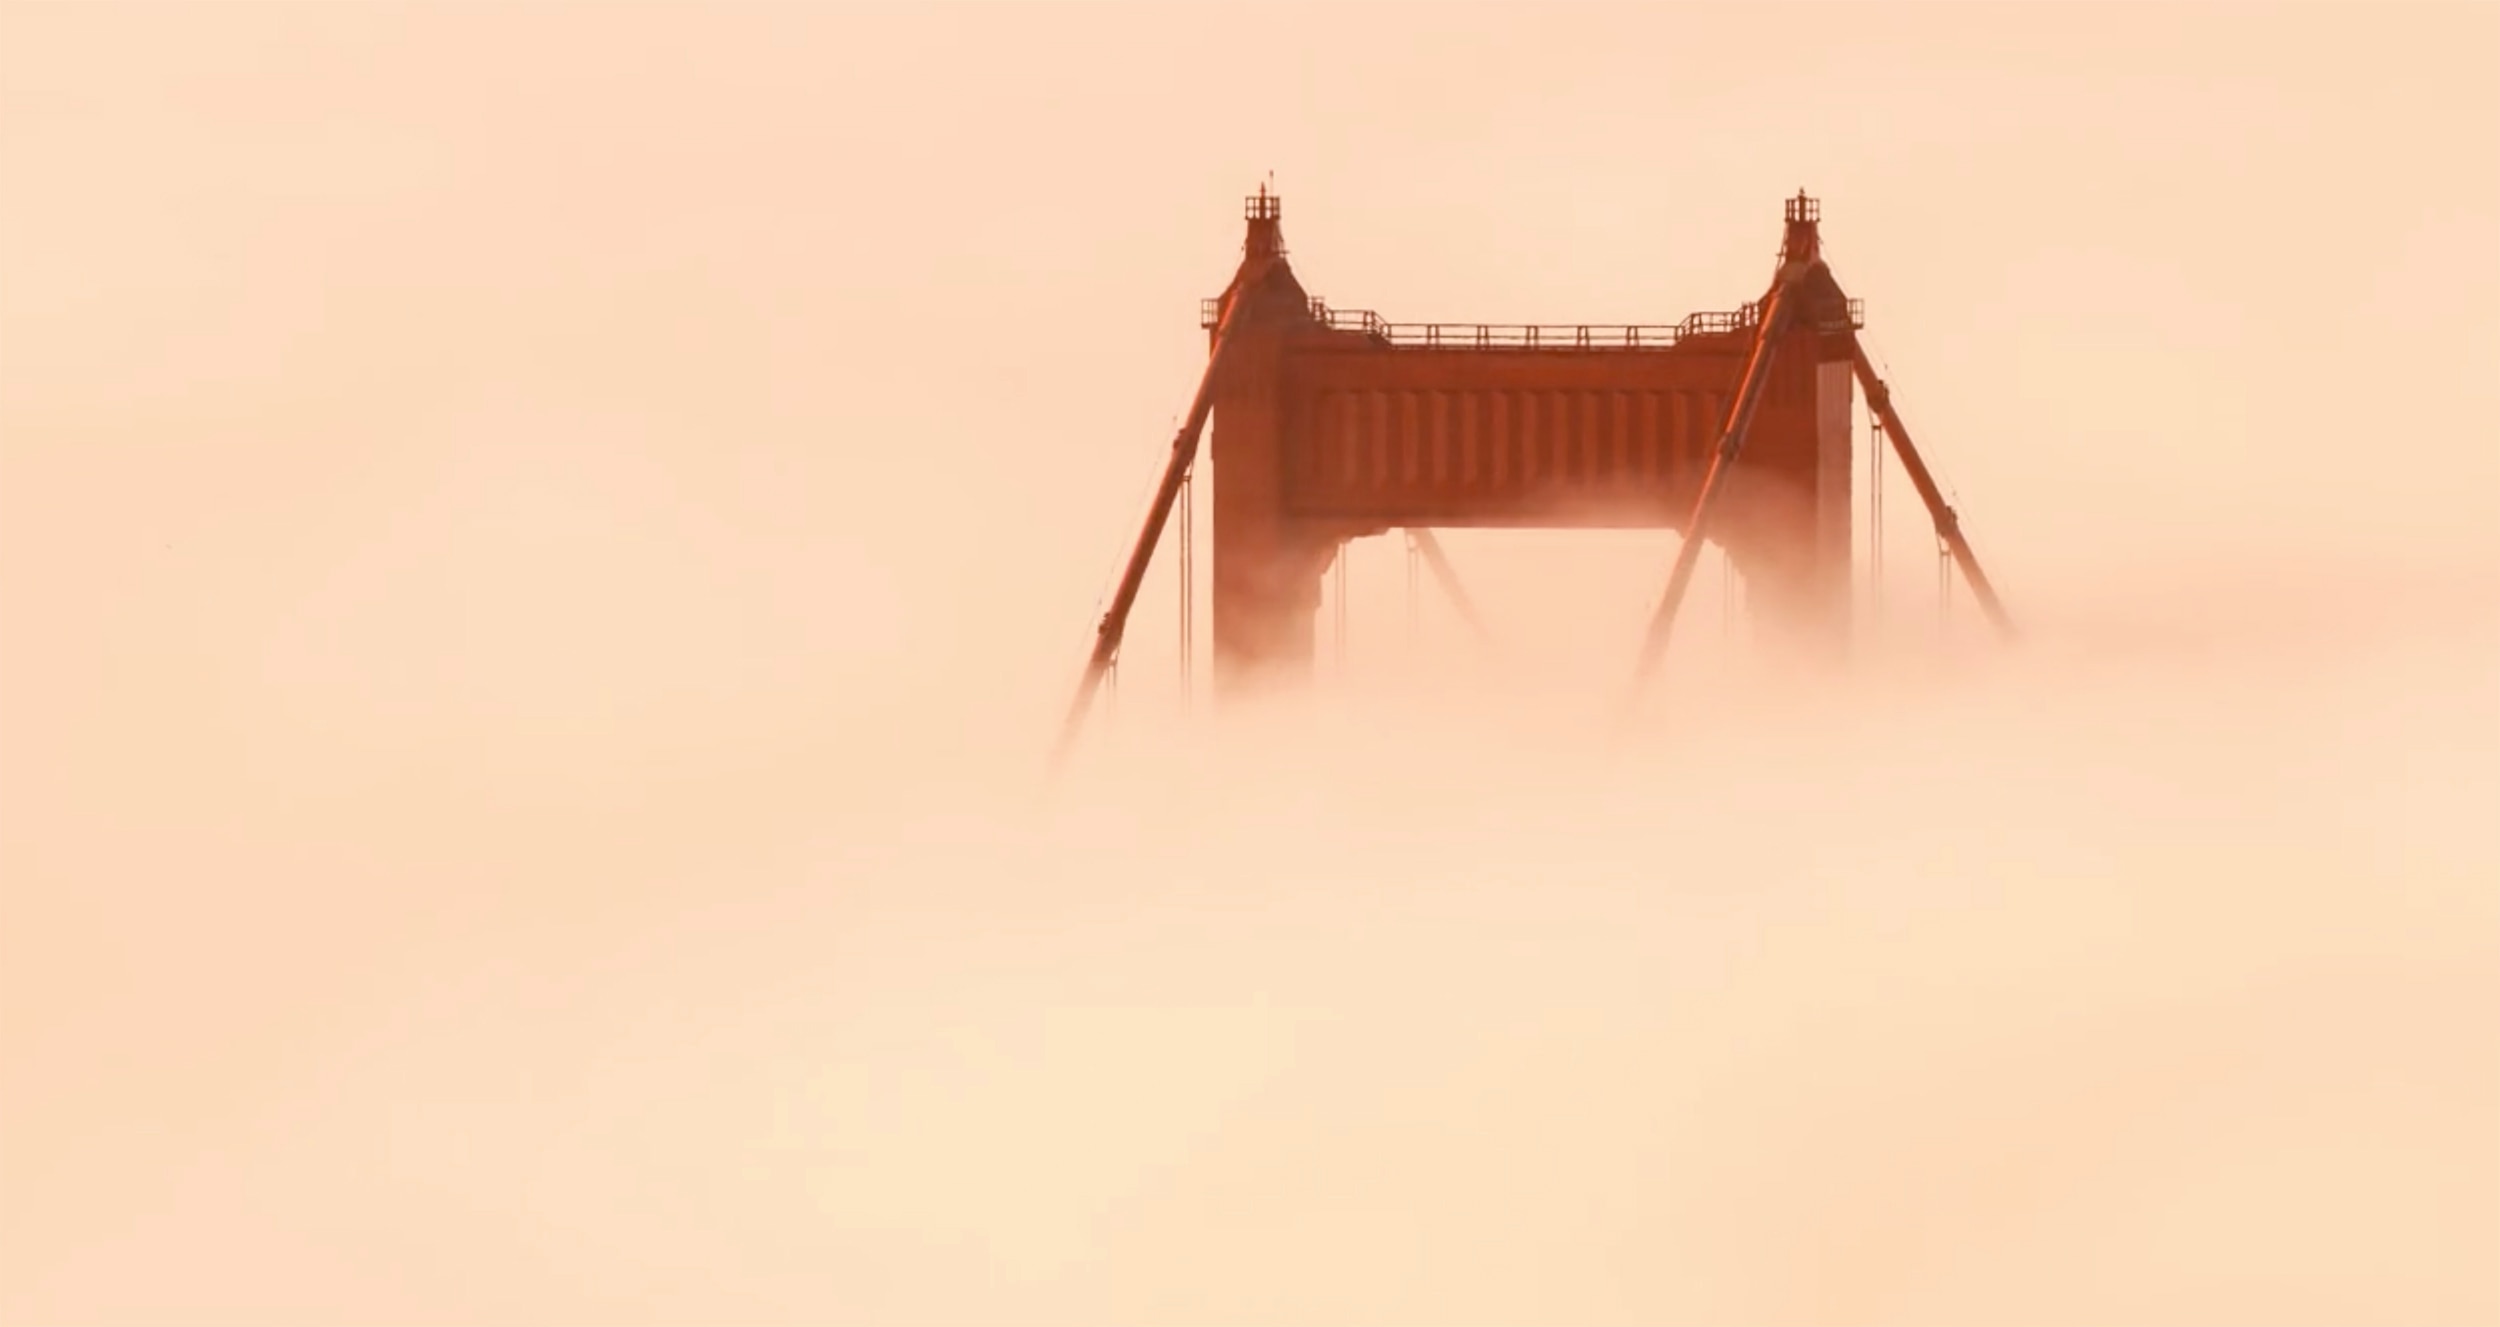 The Golden Gate Bridge almost lost in fog flowing in from the Pacific Ocean. Taken from the video “Adrift”. 